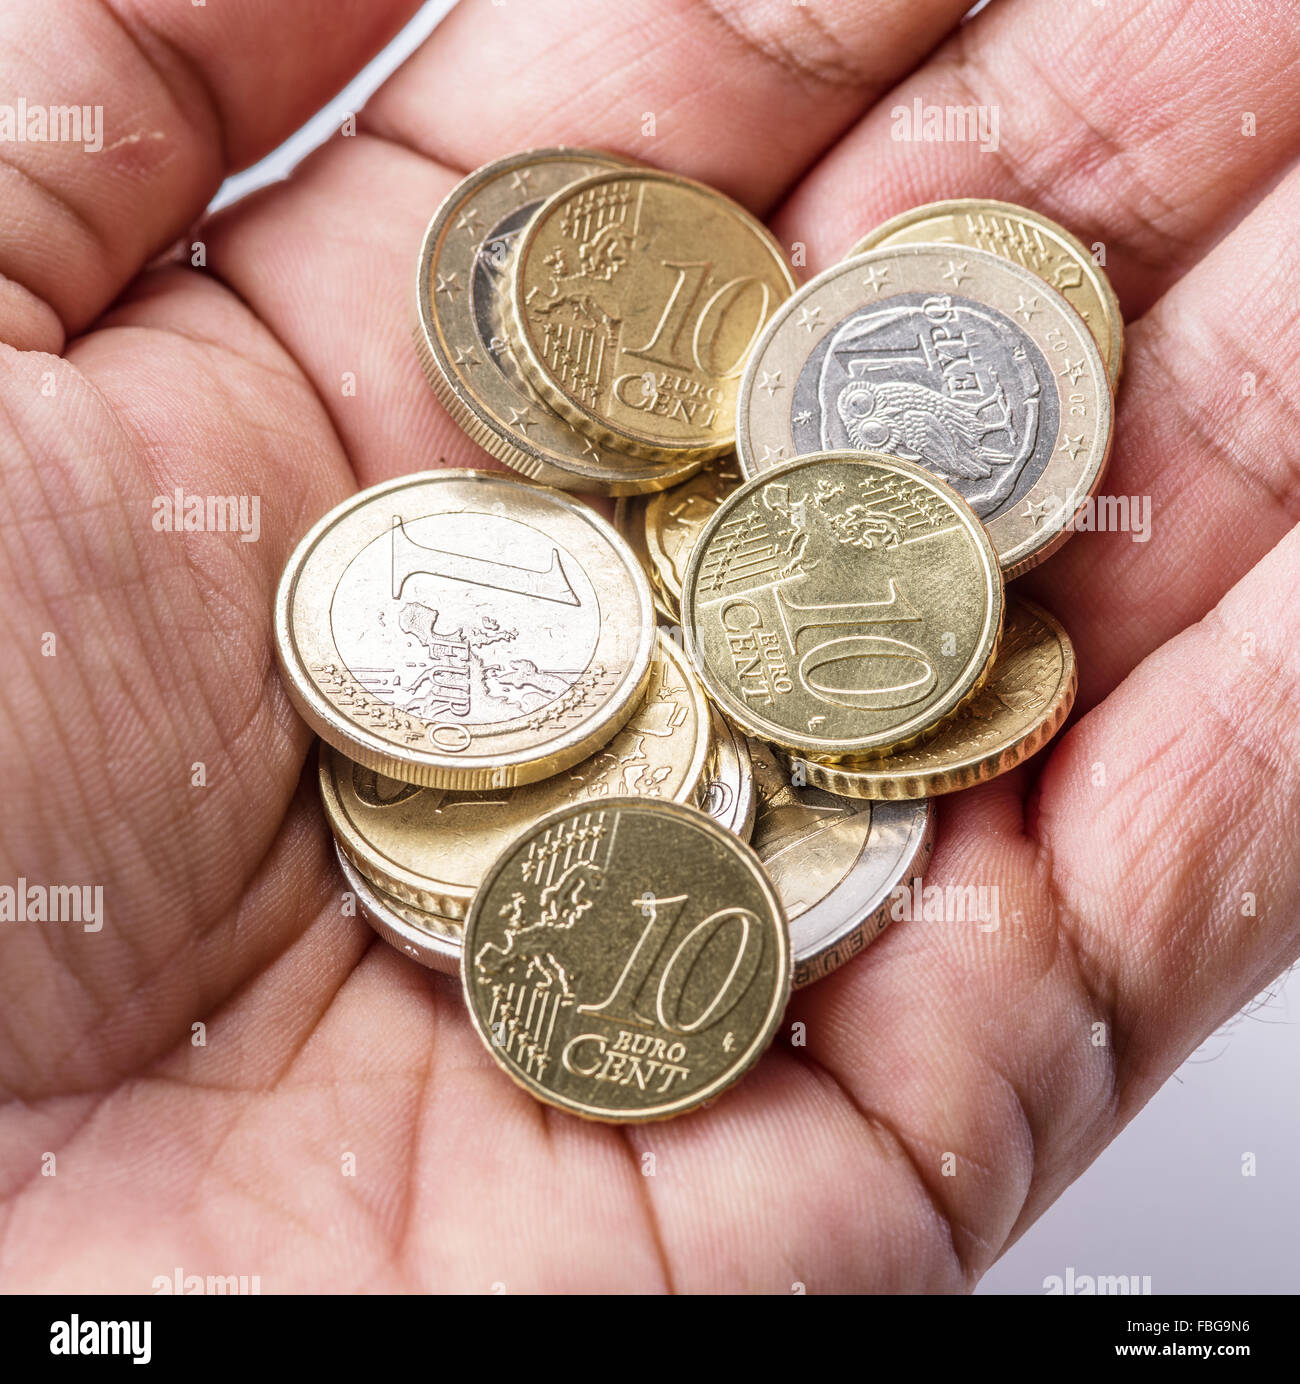 Euro coins on the man's palm on white background. Stock Photo